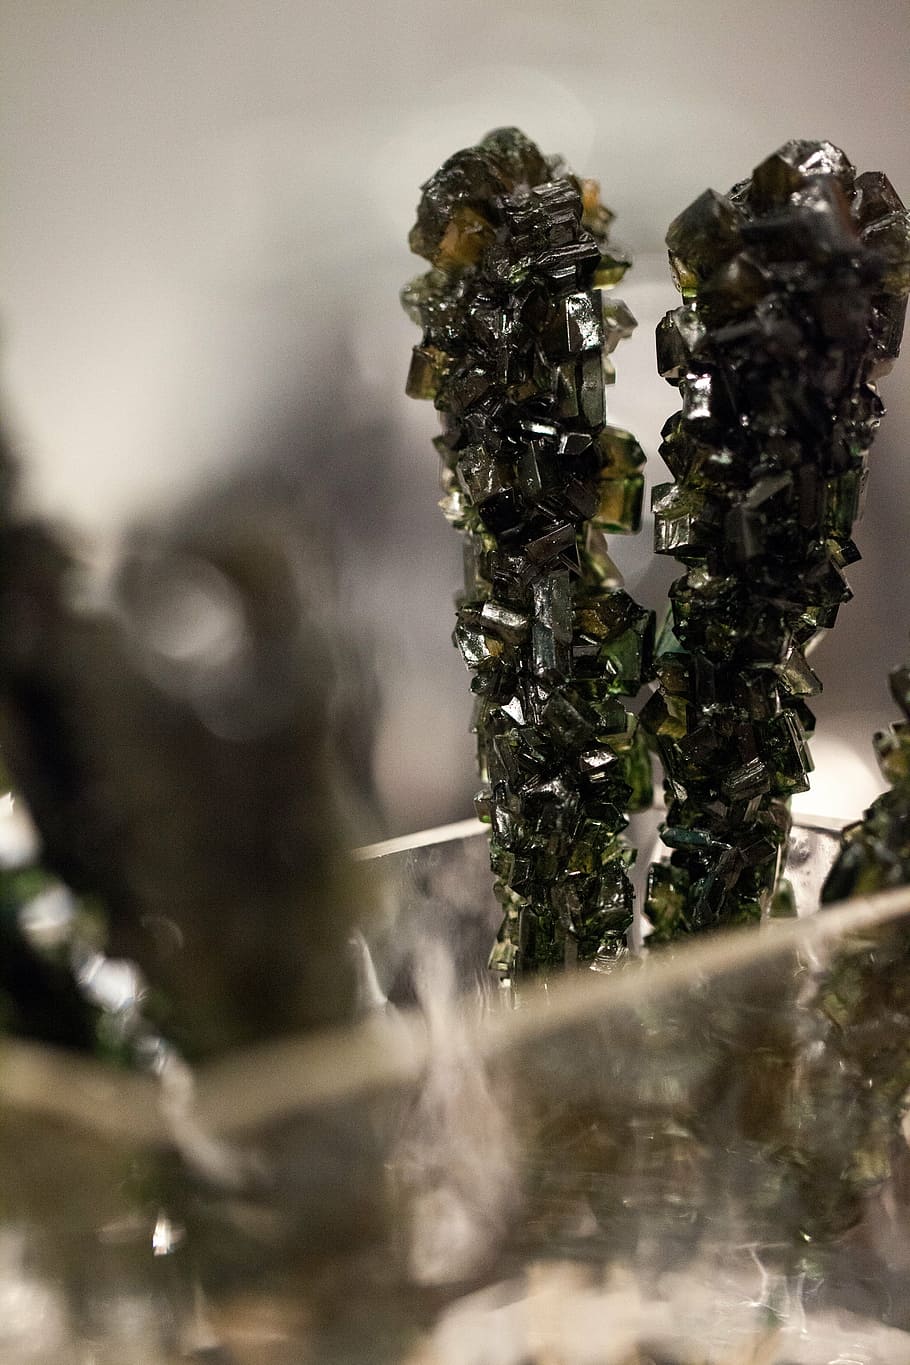 rock candy, stick, sugar, sweet, crystal, black, table, selective focus, close-up, day